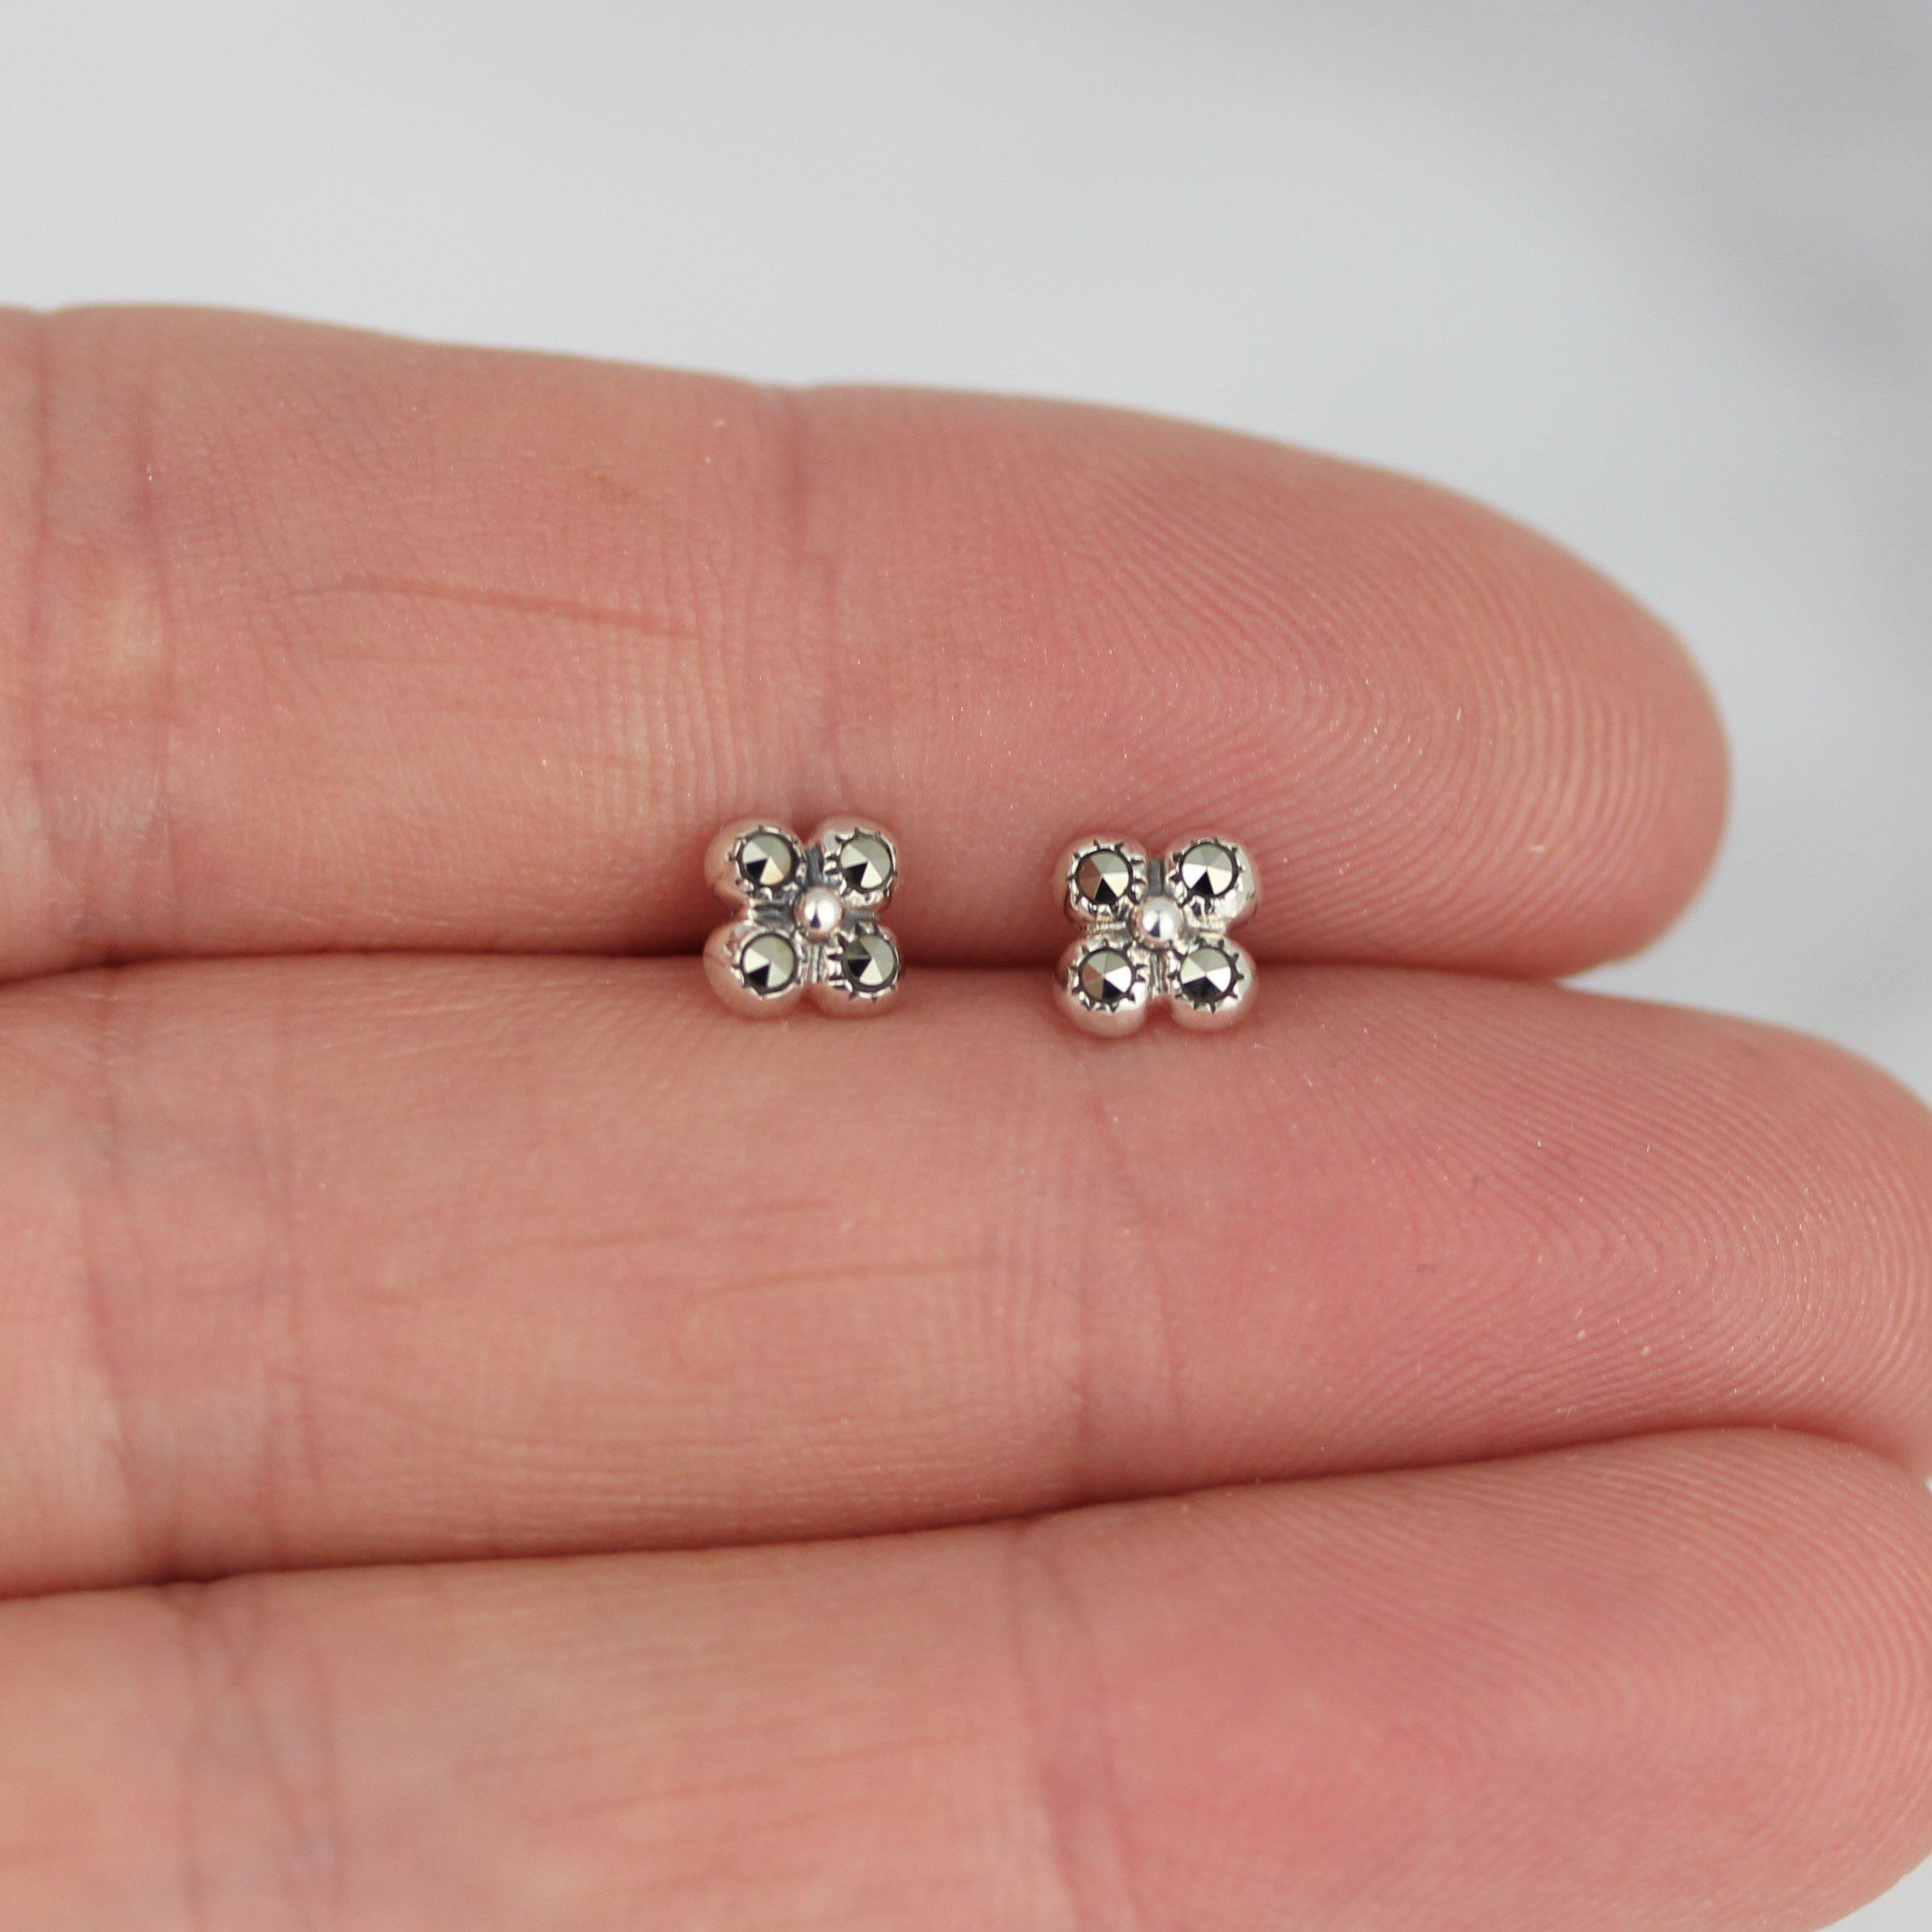 Sterling Silver Marcasite 5mm Small Tiny Stud Earrings - STERLING SILVER DESIGNS